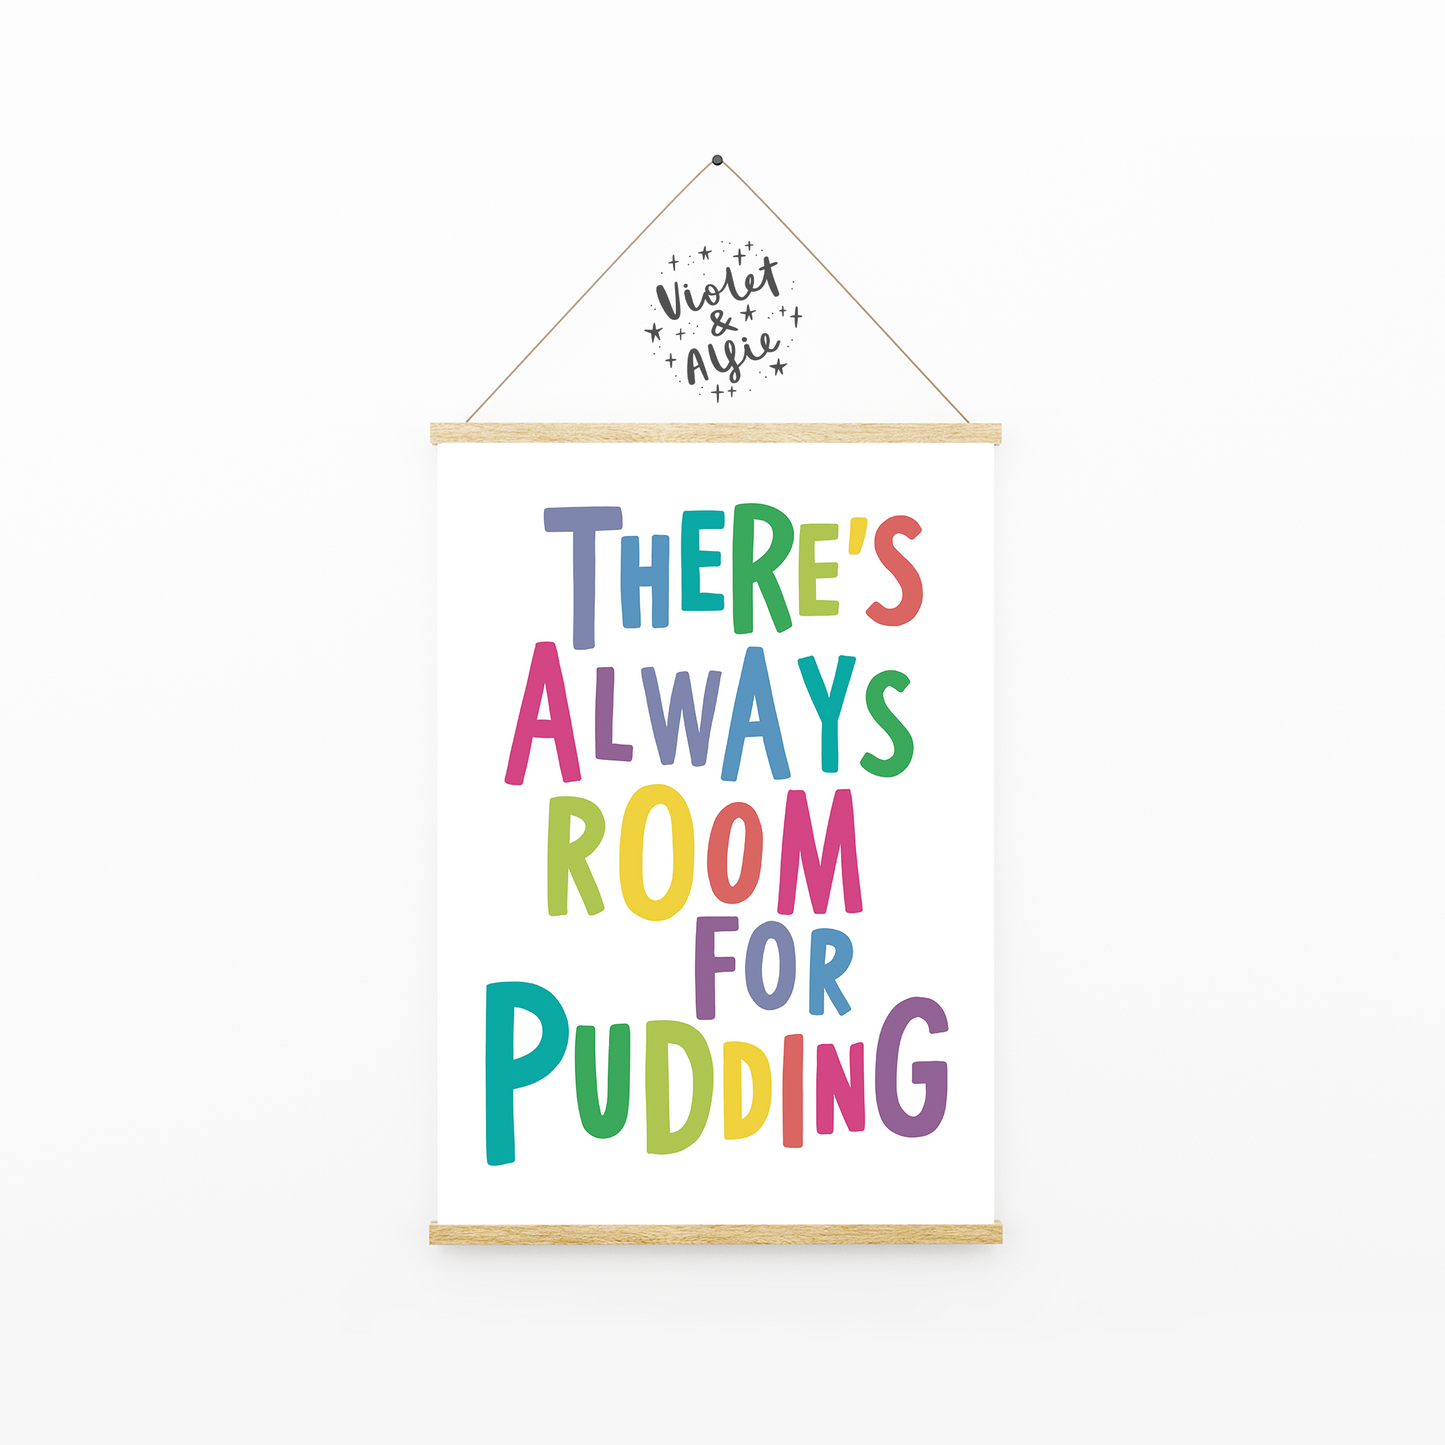 There's always room for pudding, kitchen prints, colourful kitchen decor, wall art for dining room, colourful prints for kitchen, typographic prints, fun kitchen wall art, family kitchen wall art prints